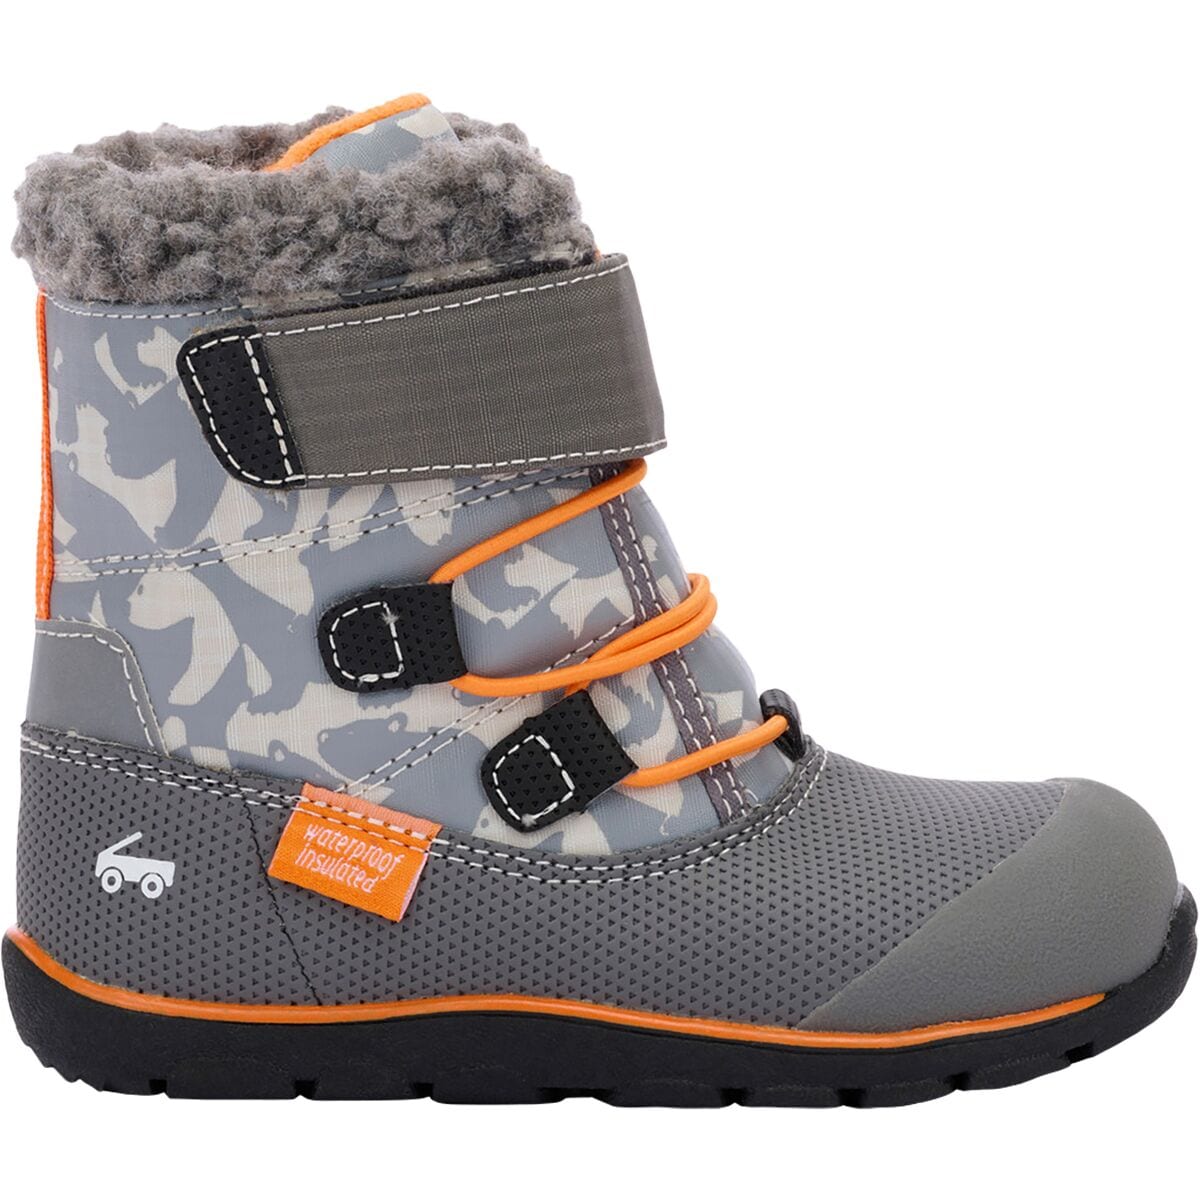 Gilman Waterproof Insulated Boot - Toddler Boys